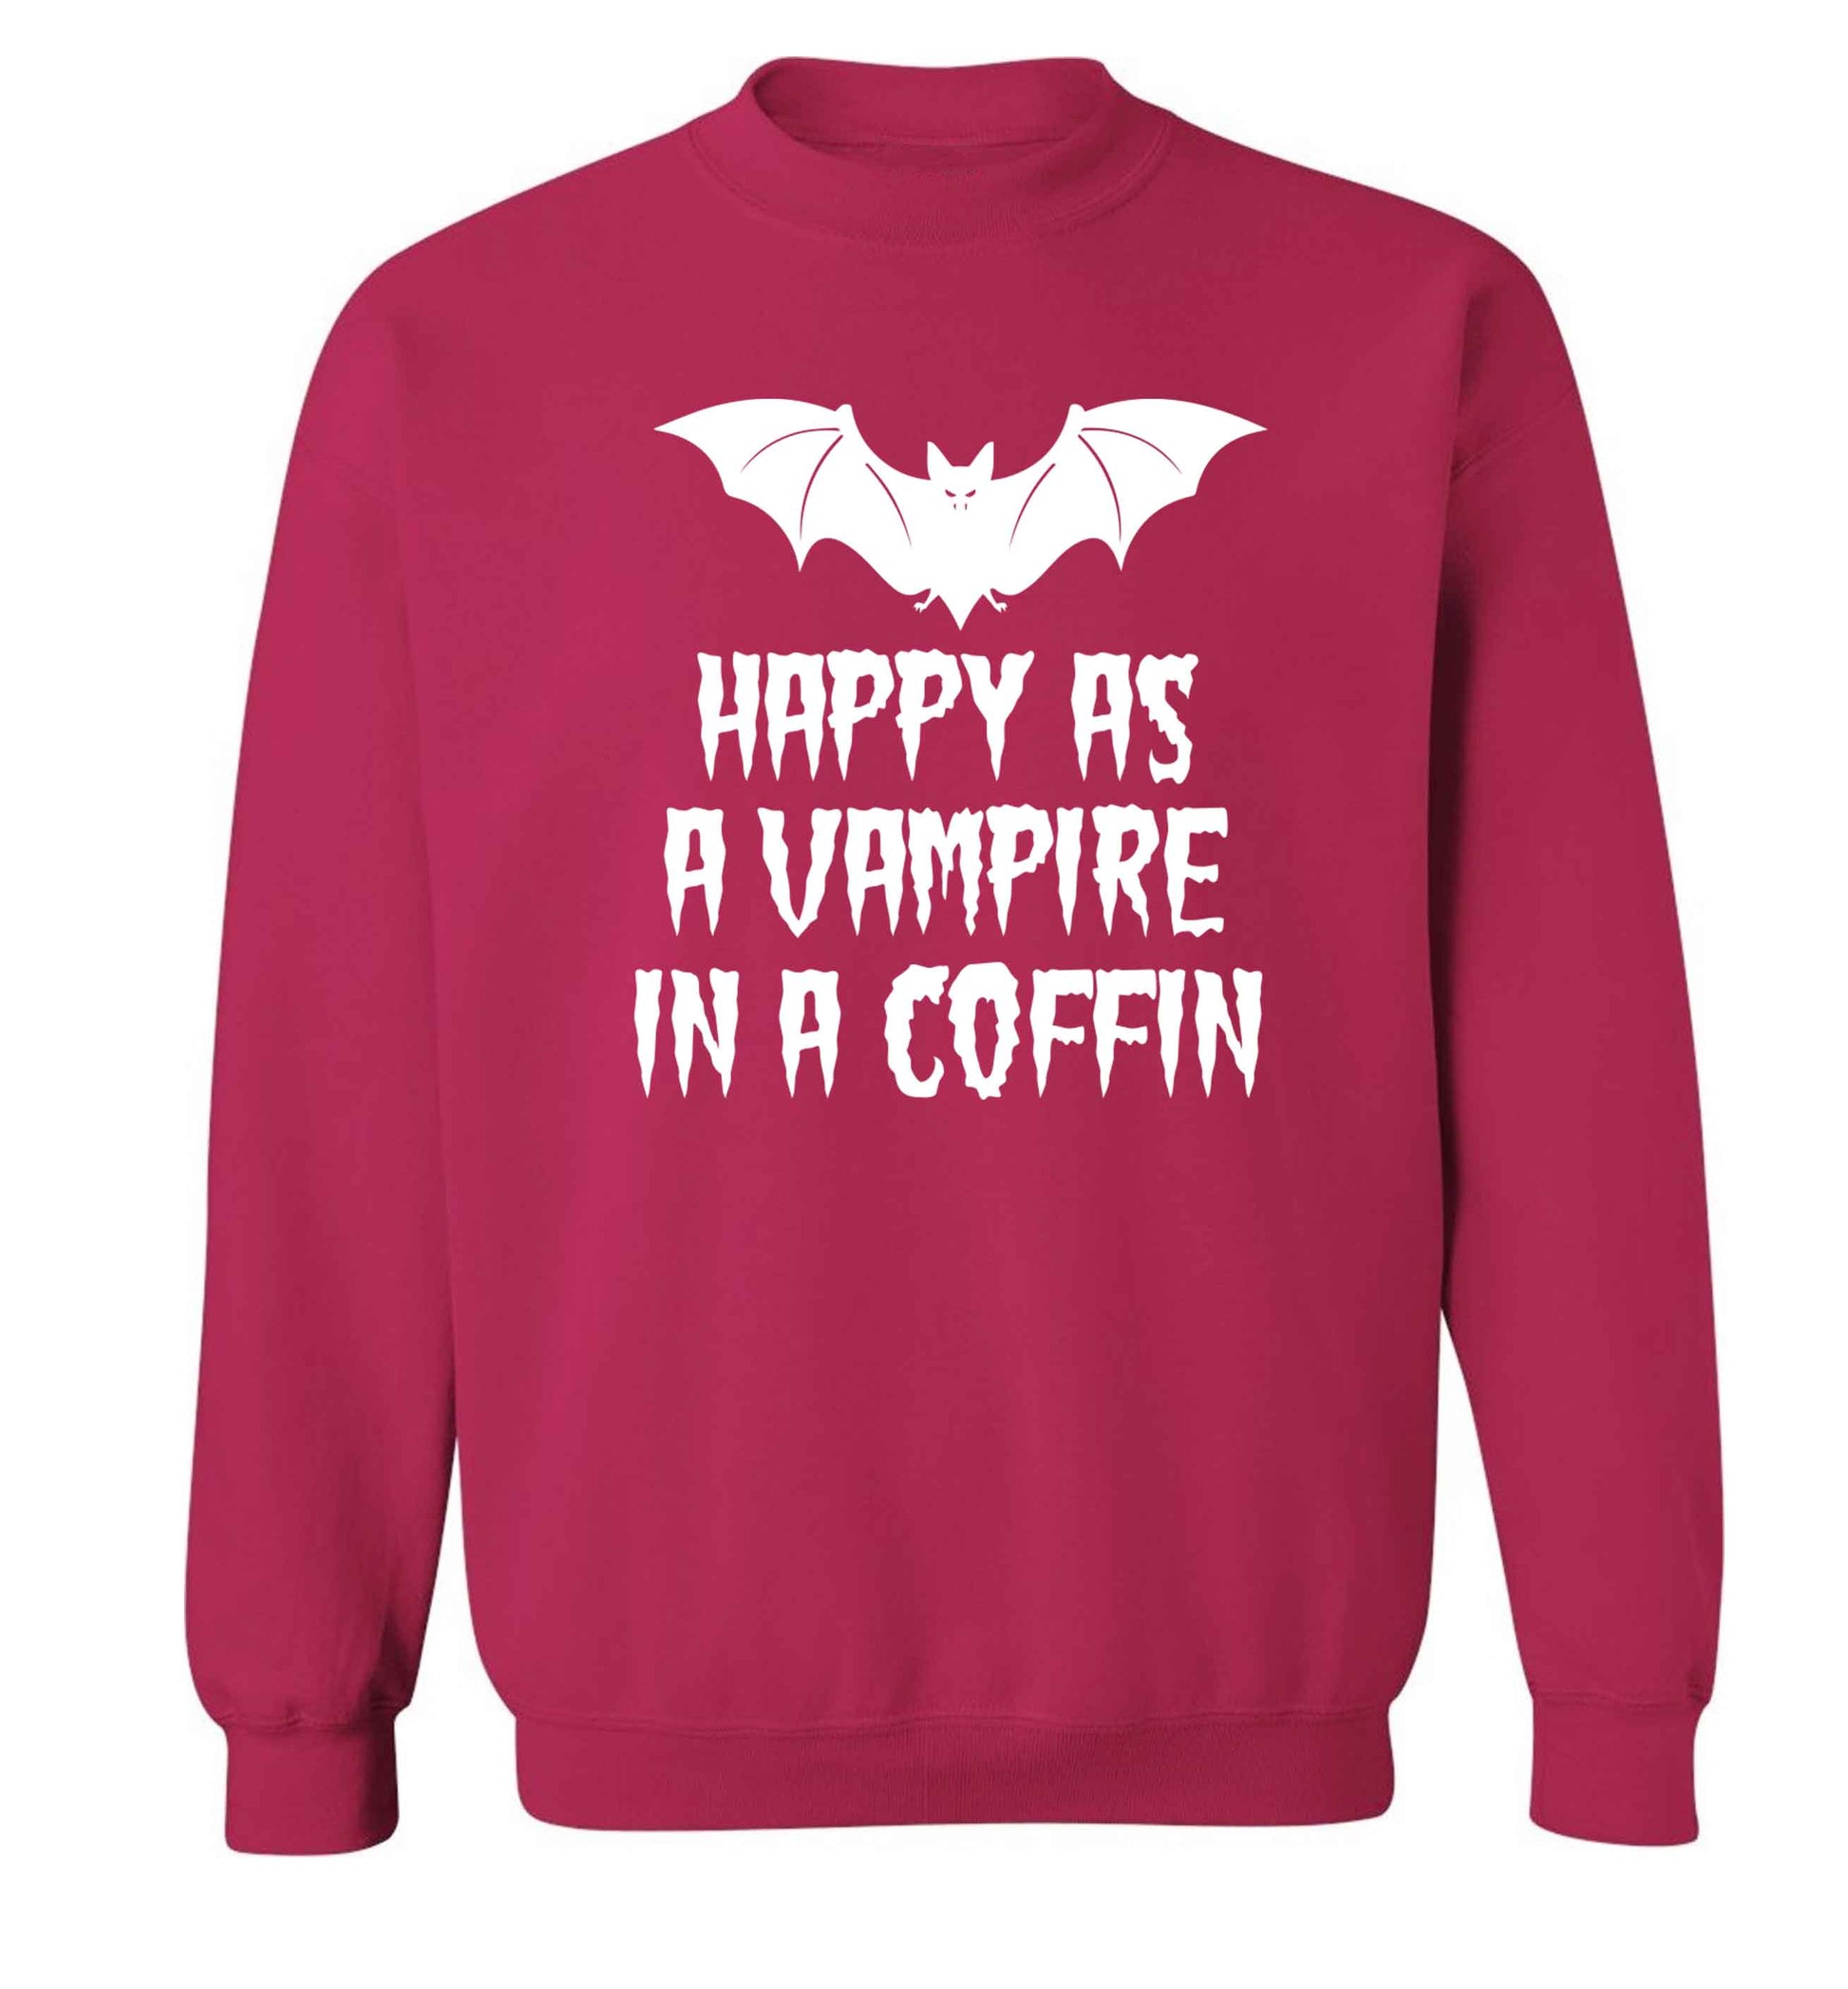 Happy as a vampire in a coffin Adult's unisex pink Sweater 2XL